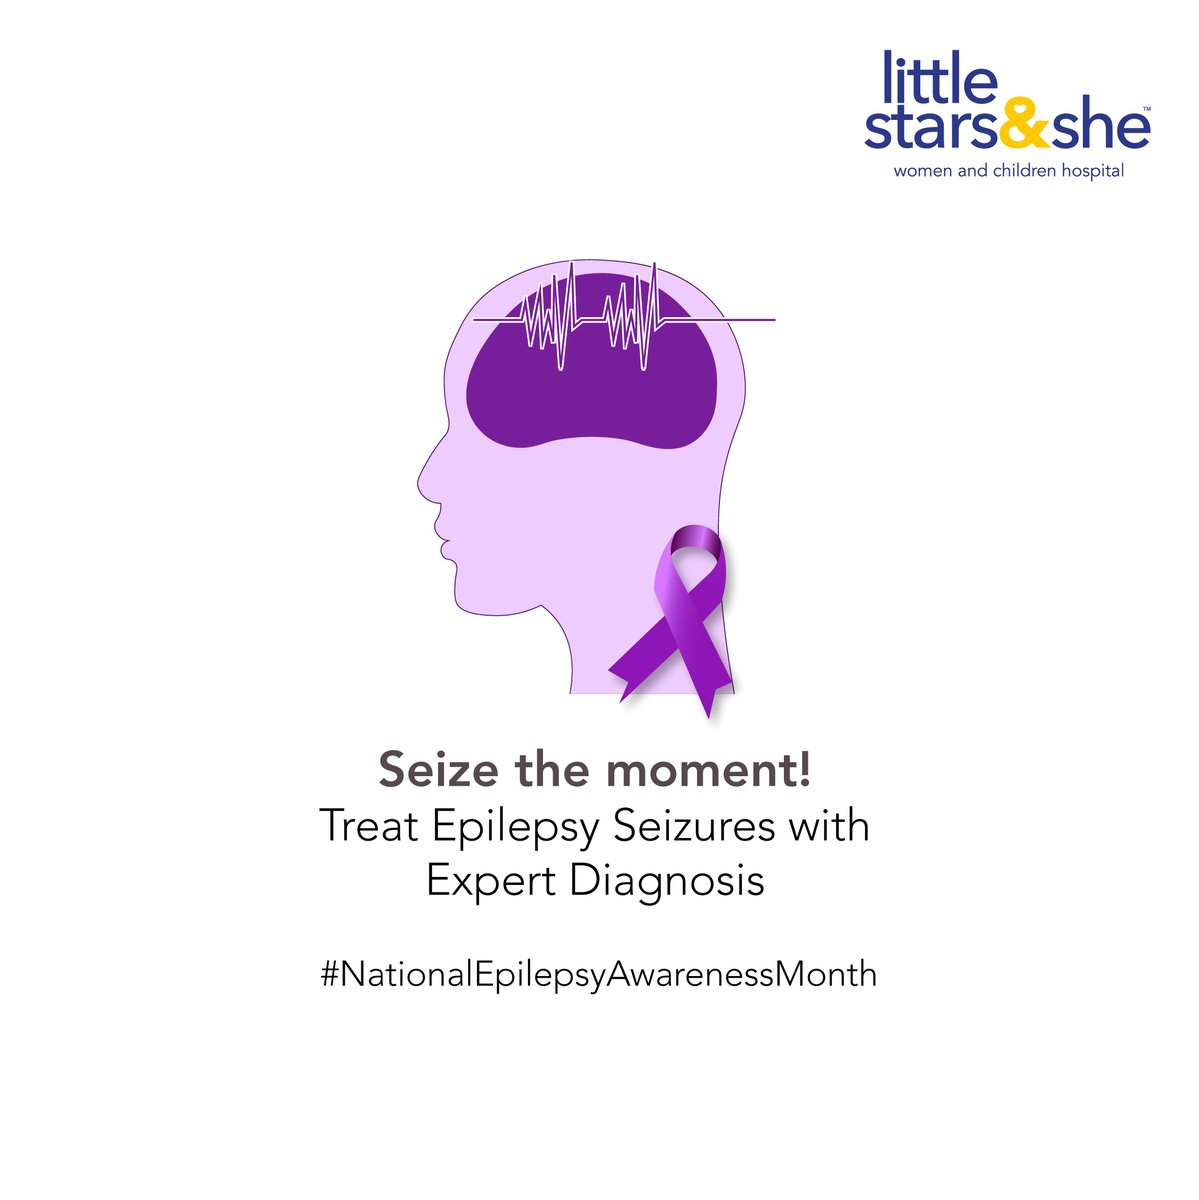 With our cutting-edge Epilepsy diagnosis and treatment, we strive to make a difference in the lives of children battling this condition.

#littlestarsandshe #epilepsyawarenessmonth #epilepsyawareness #ChildrensCare #WomensCare #Healthcare #Maternity #Pregnancy #Childbirth